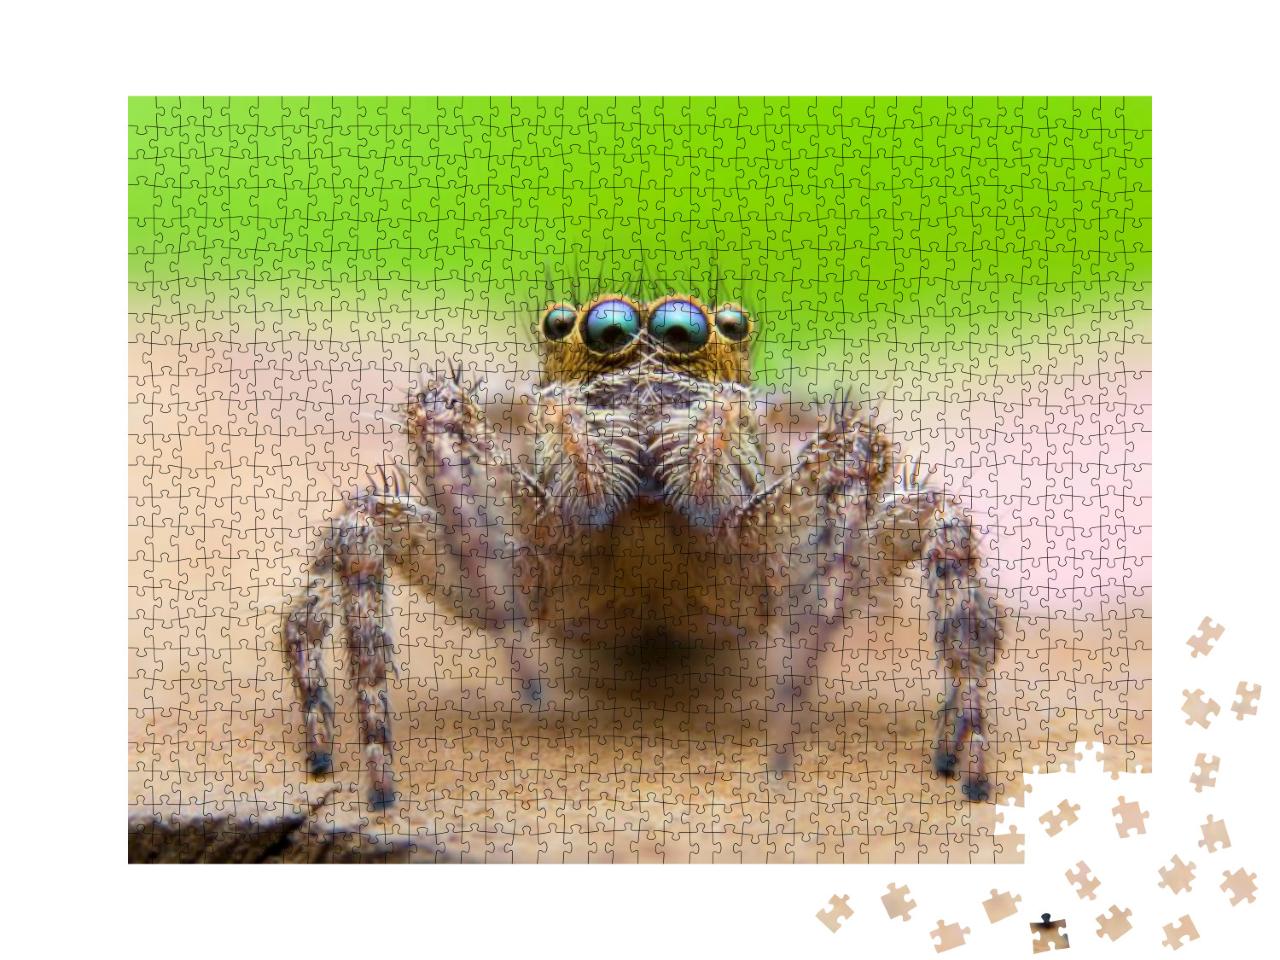 Super Macro Image of Jumping Spider Salticidae At High Ma... Jigsaw Puzzle with 1000 pieces